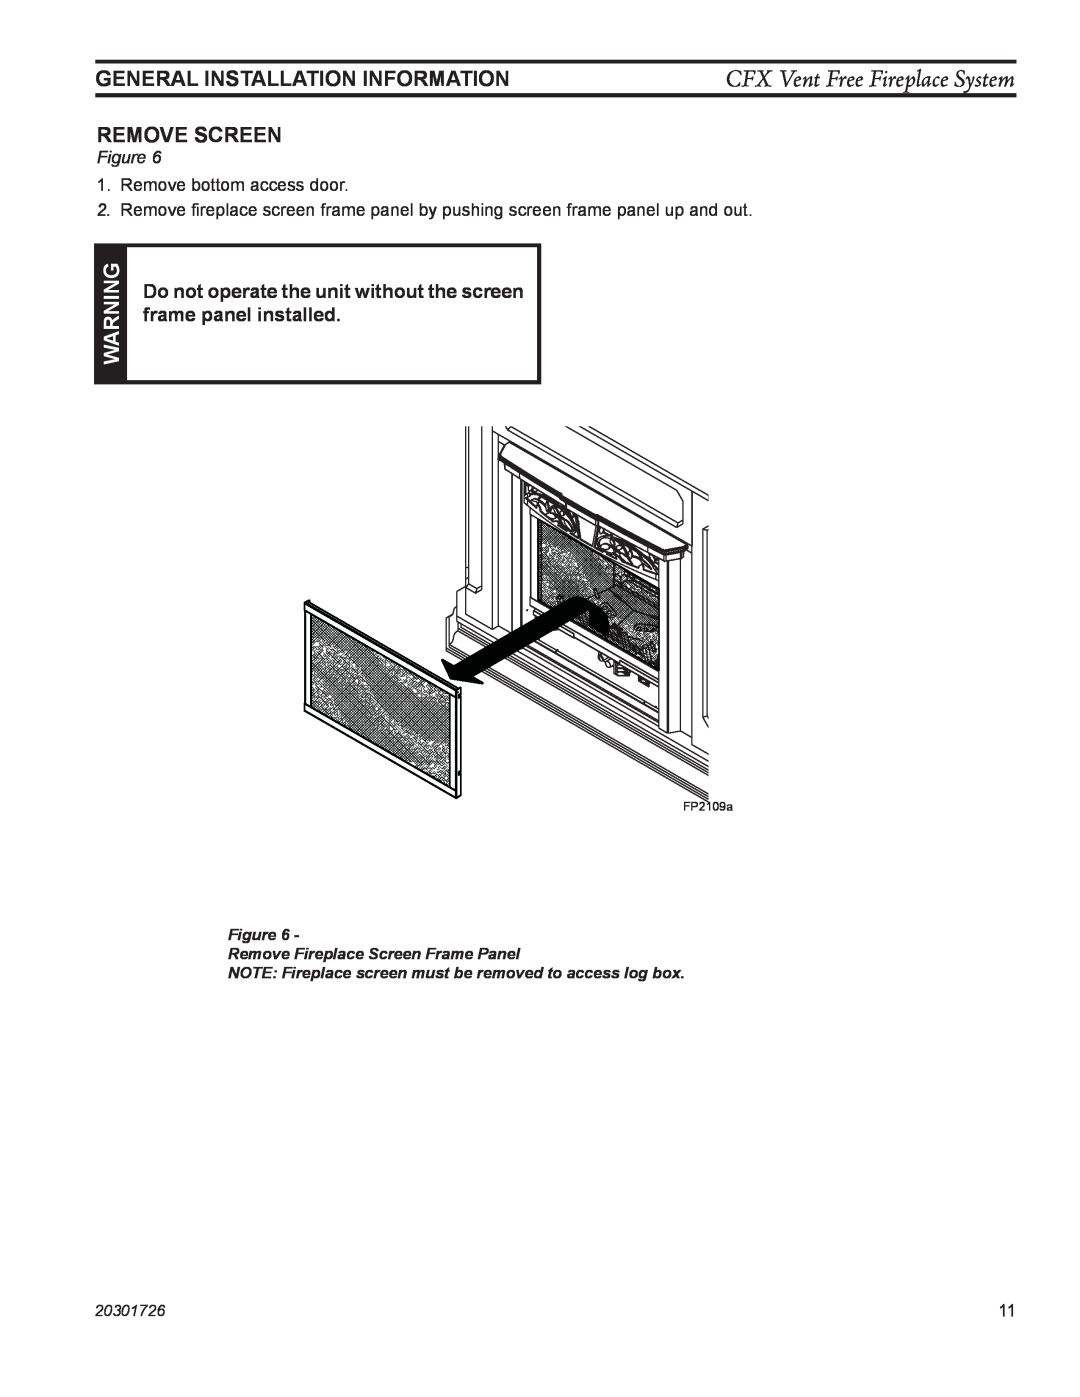 Monessen Hearth CFX32 General Installation Information, Remove Screen, CFX Vent Free Fireplace System, 20301726, FP2109a 